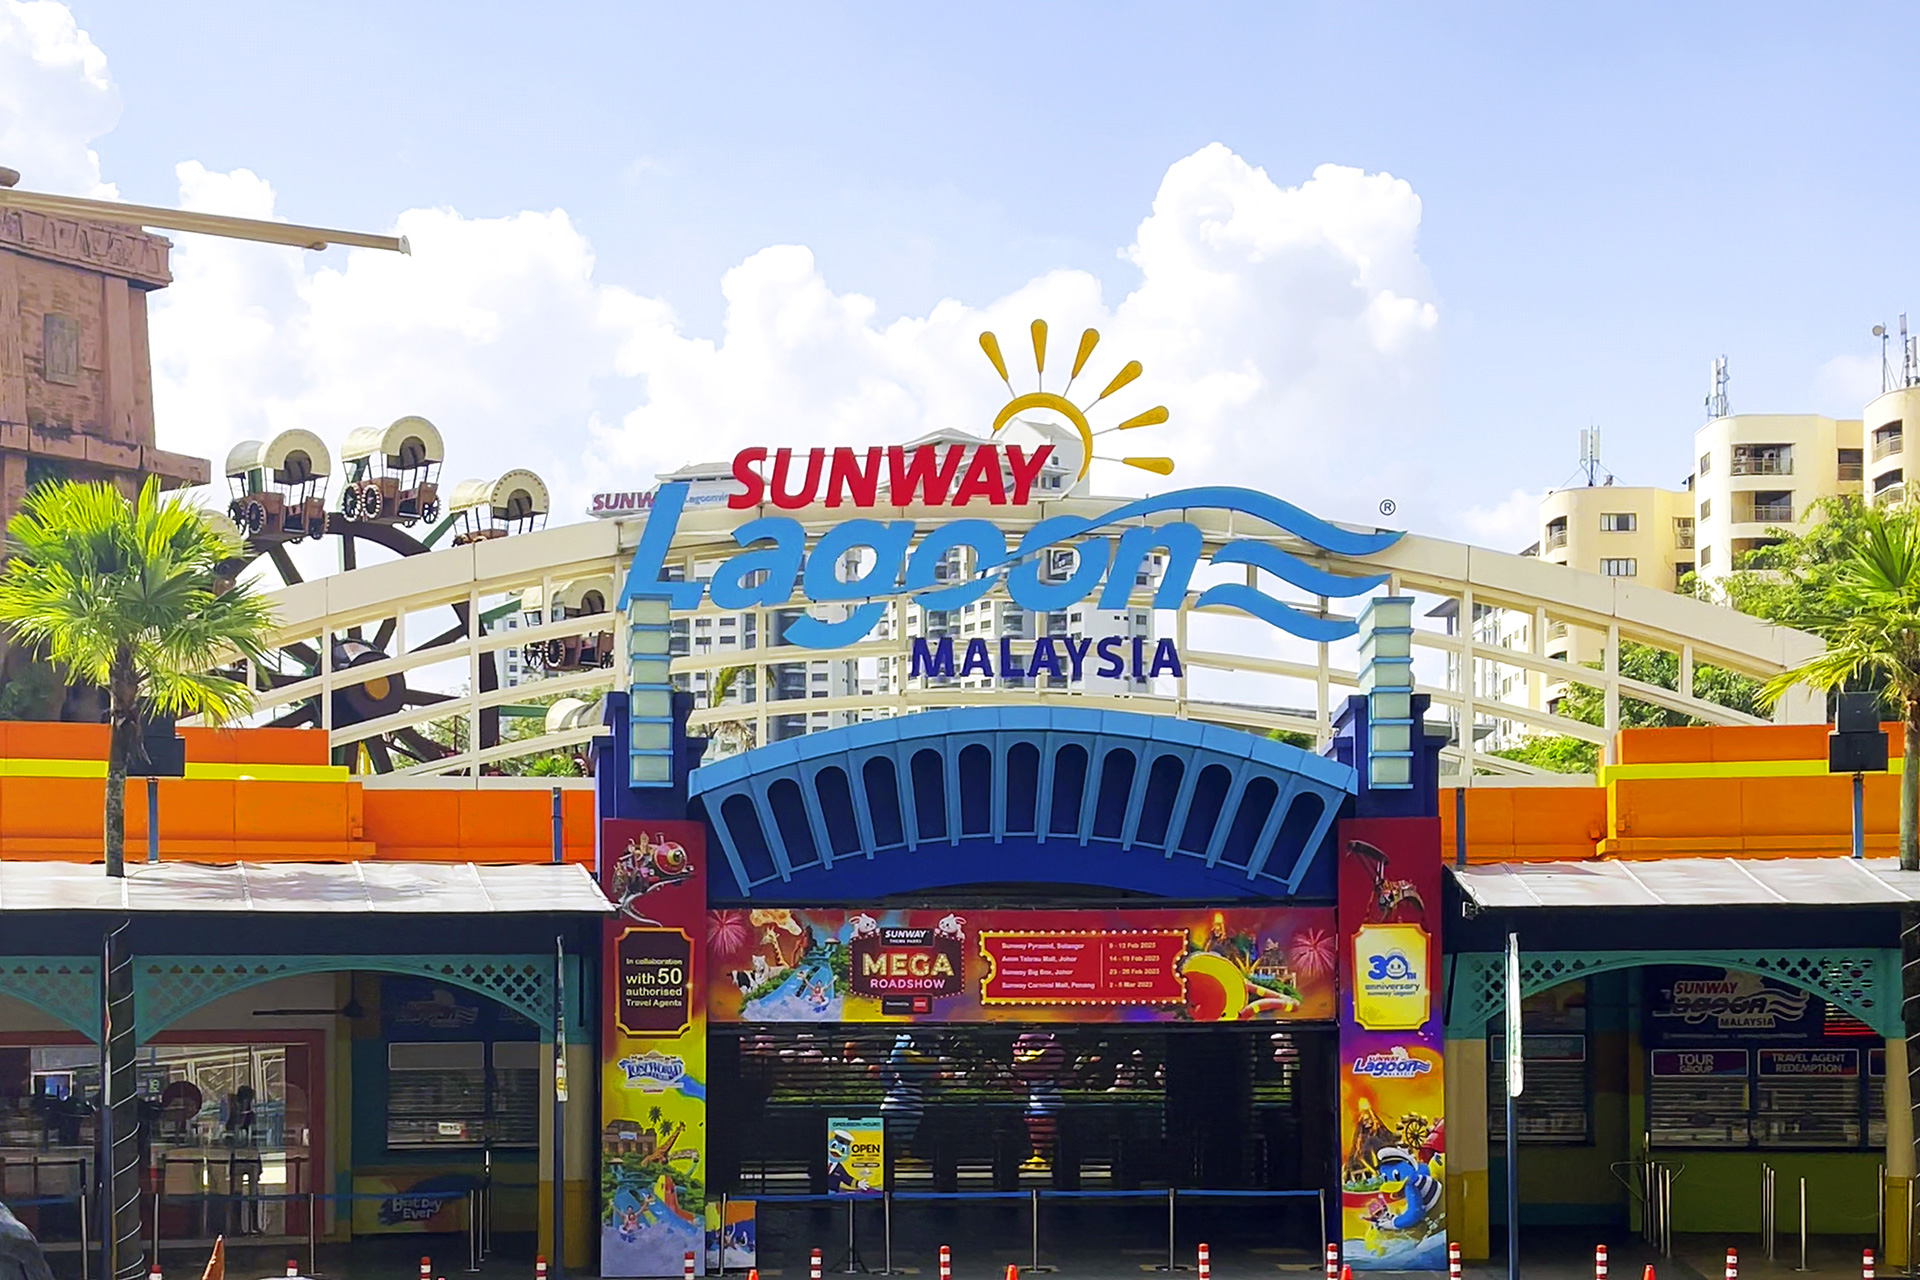 Tremendous fun awaits at Sunway Lagoon, be prepared to scream and shout!